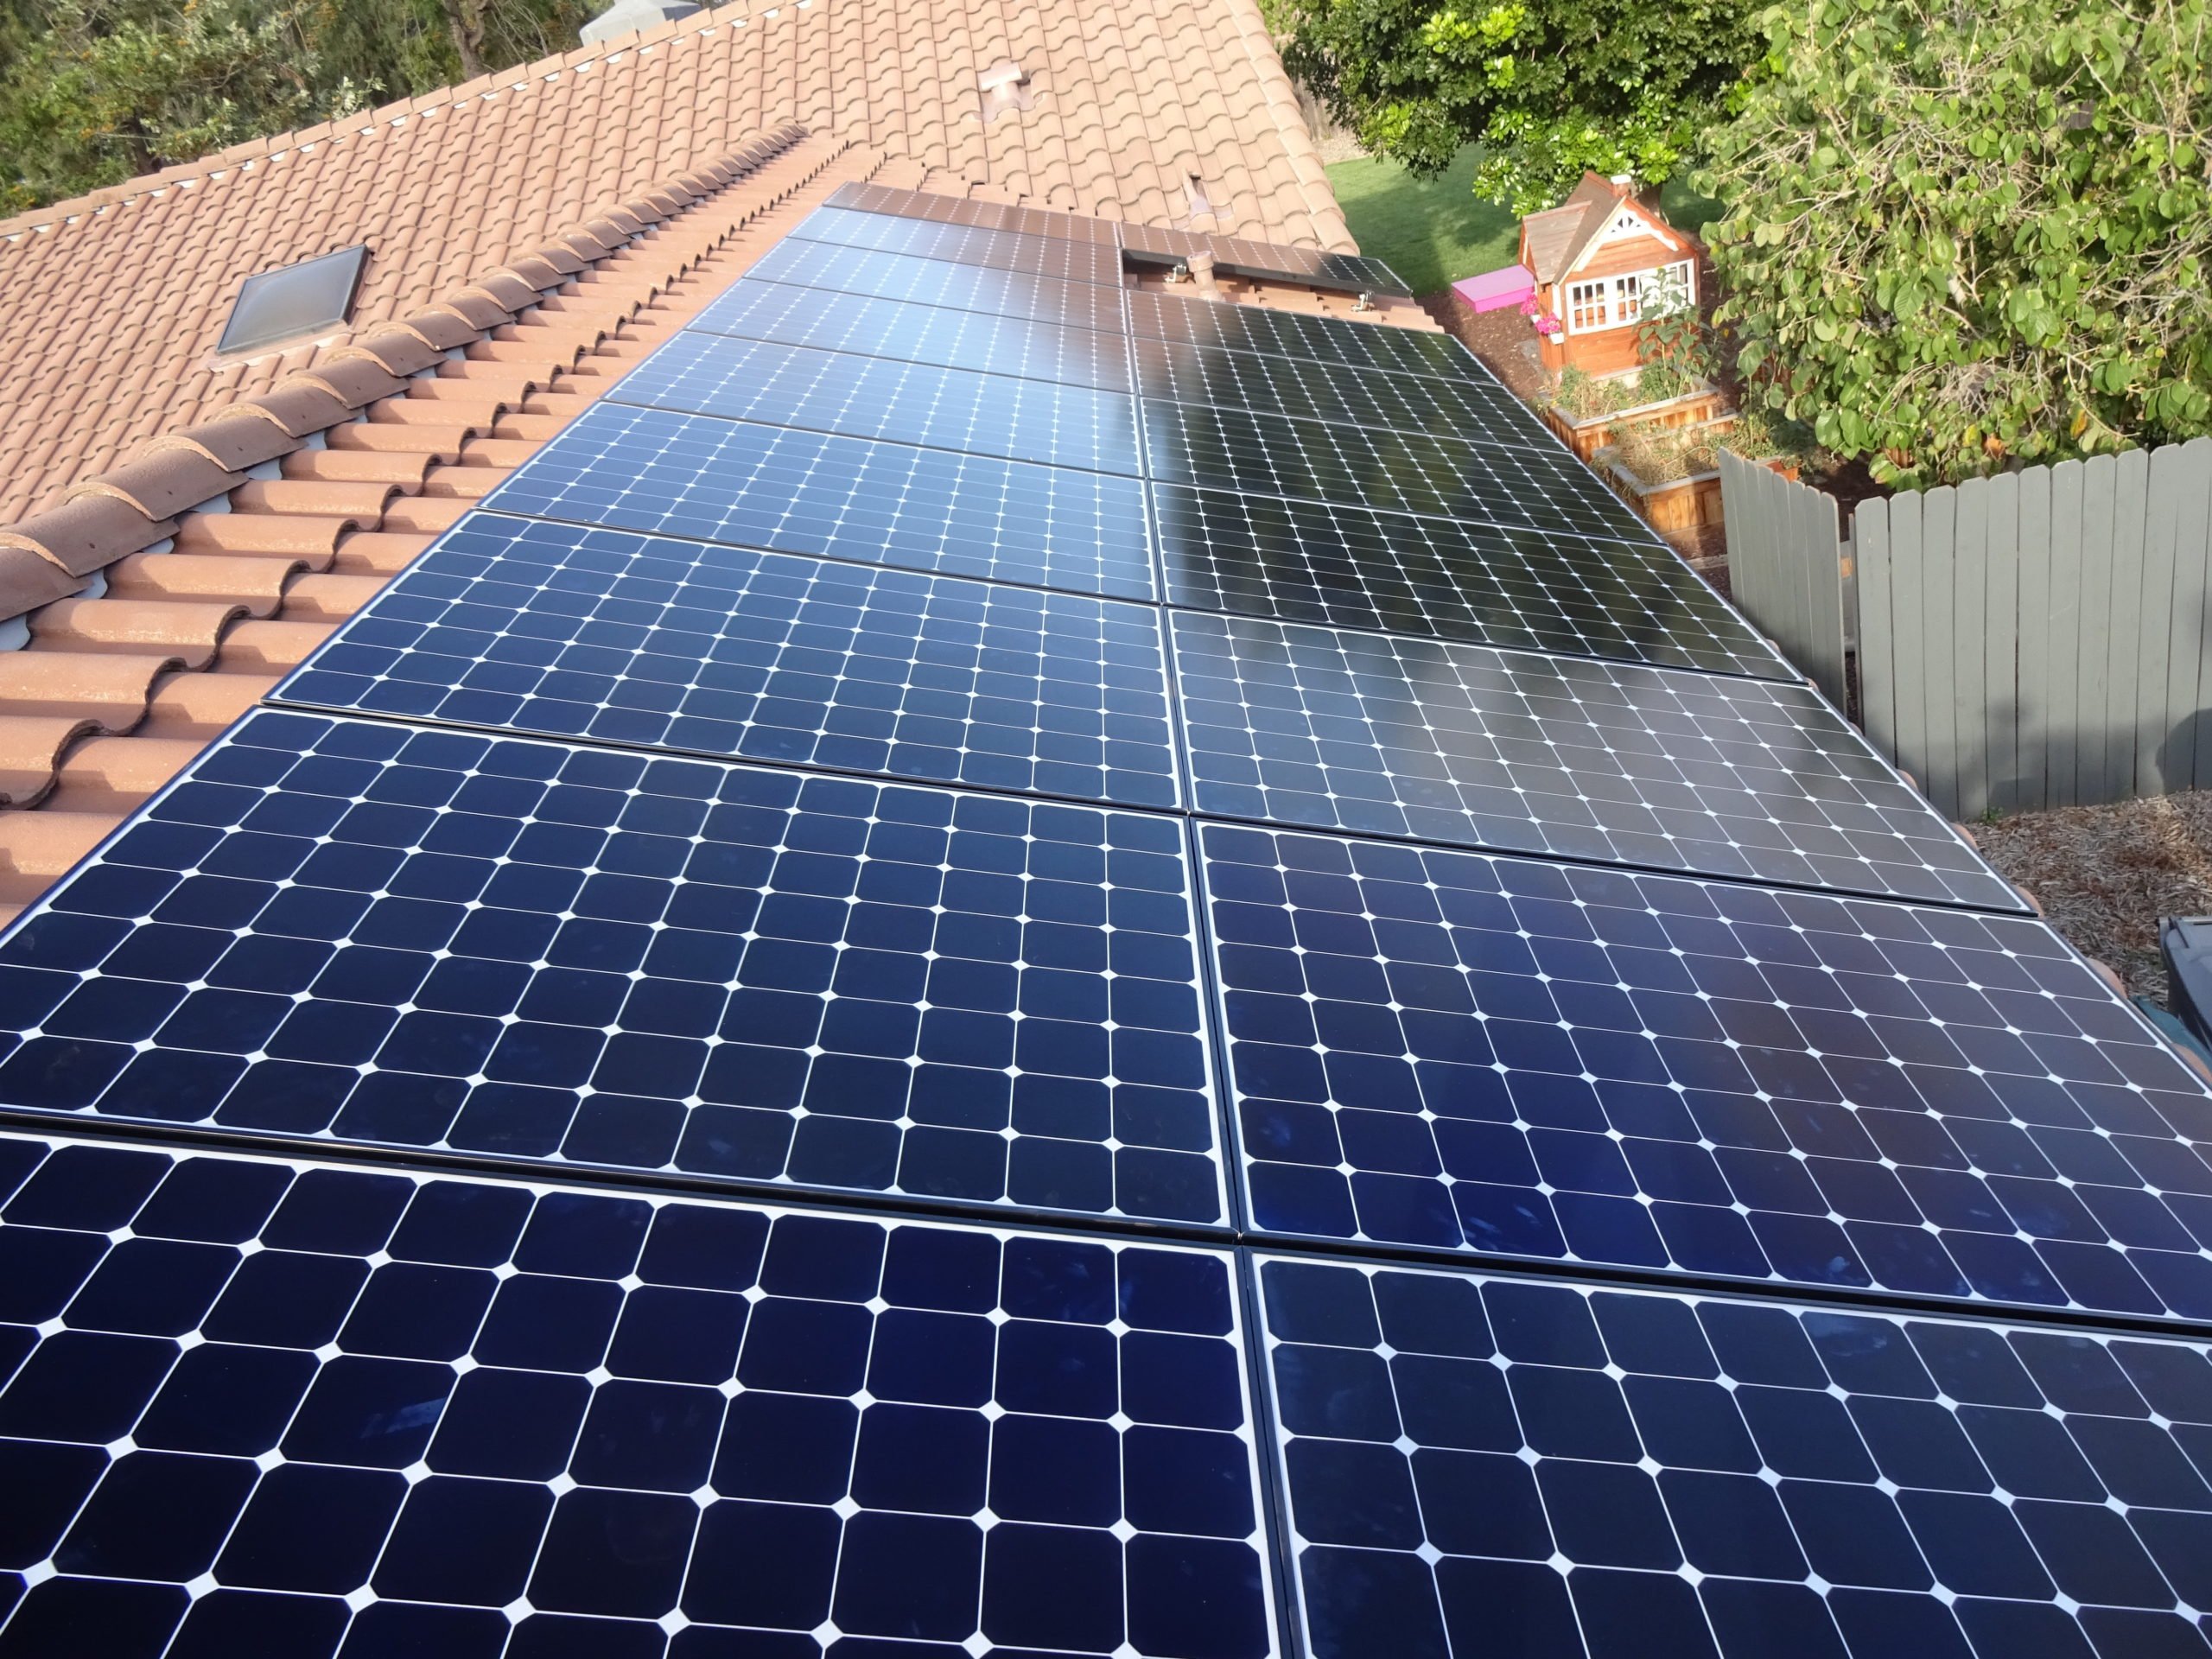 What are the best, most trusted brands of solar panels?